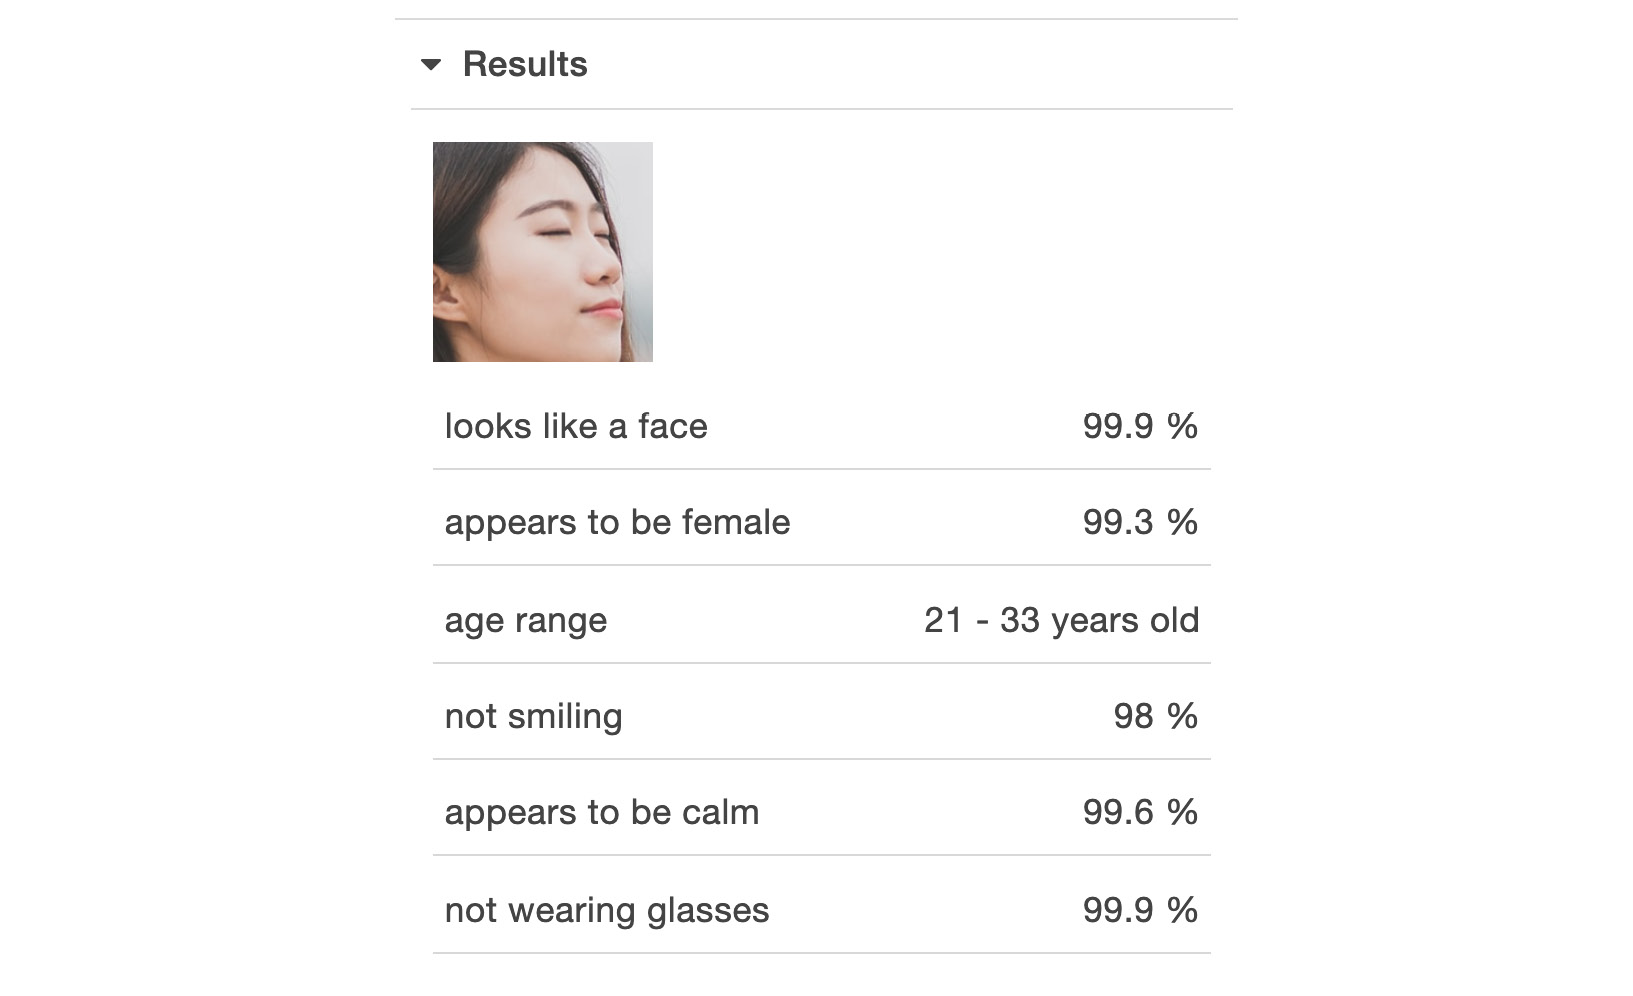 Figure 6.27: Results for the first image provided for facial analysis
